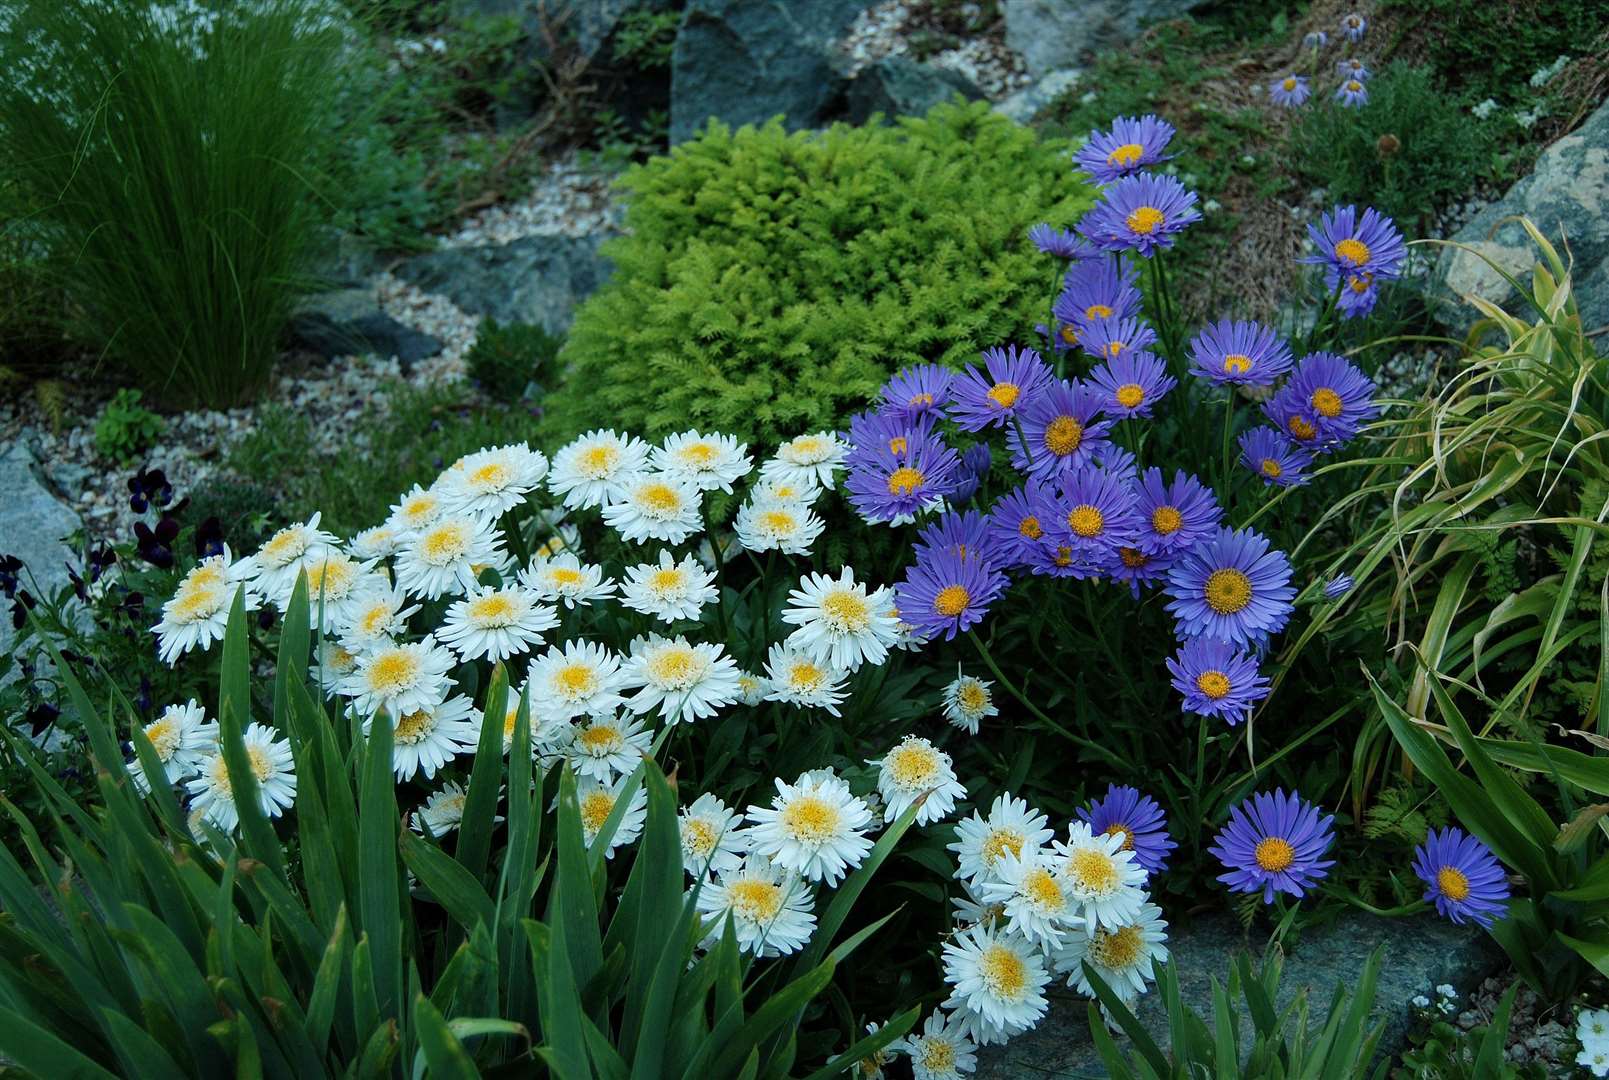 Asters.